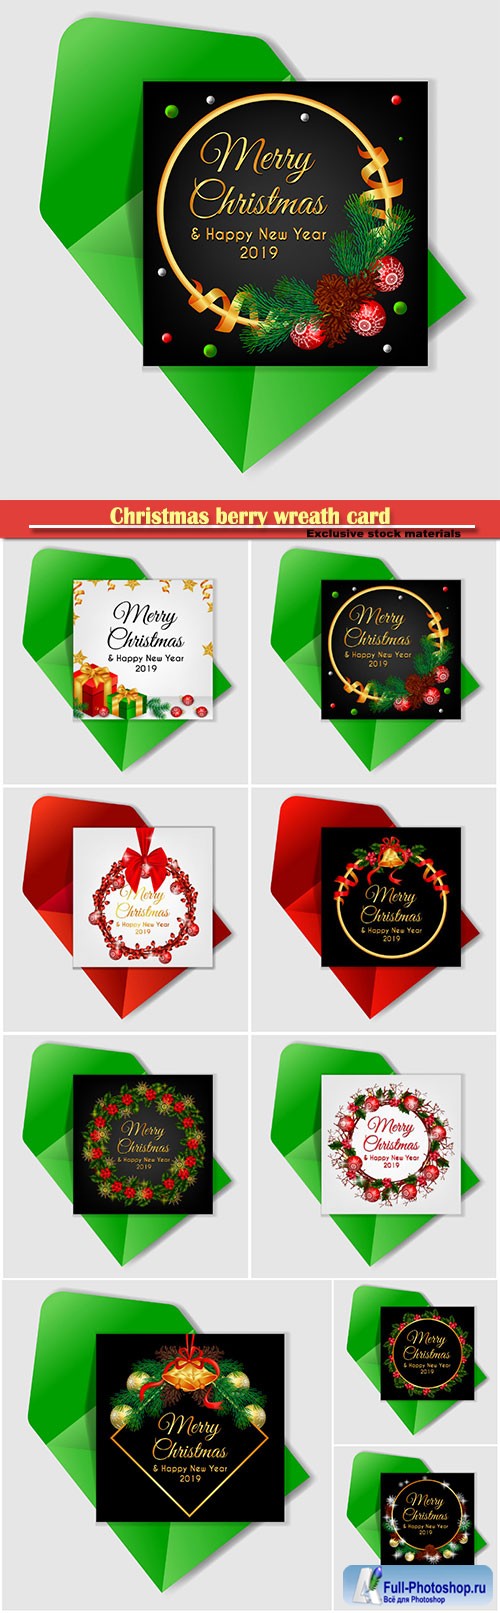 Christmas berry wreath card with jingle bell and red ribbon